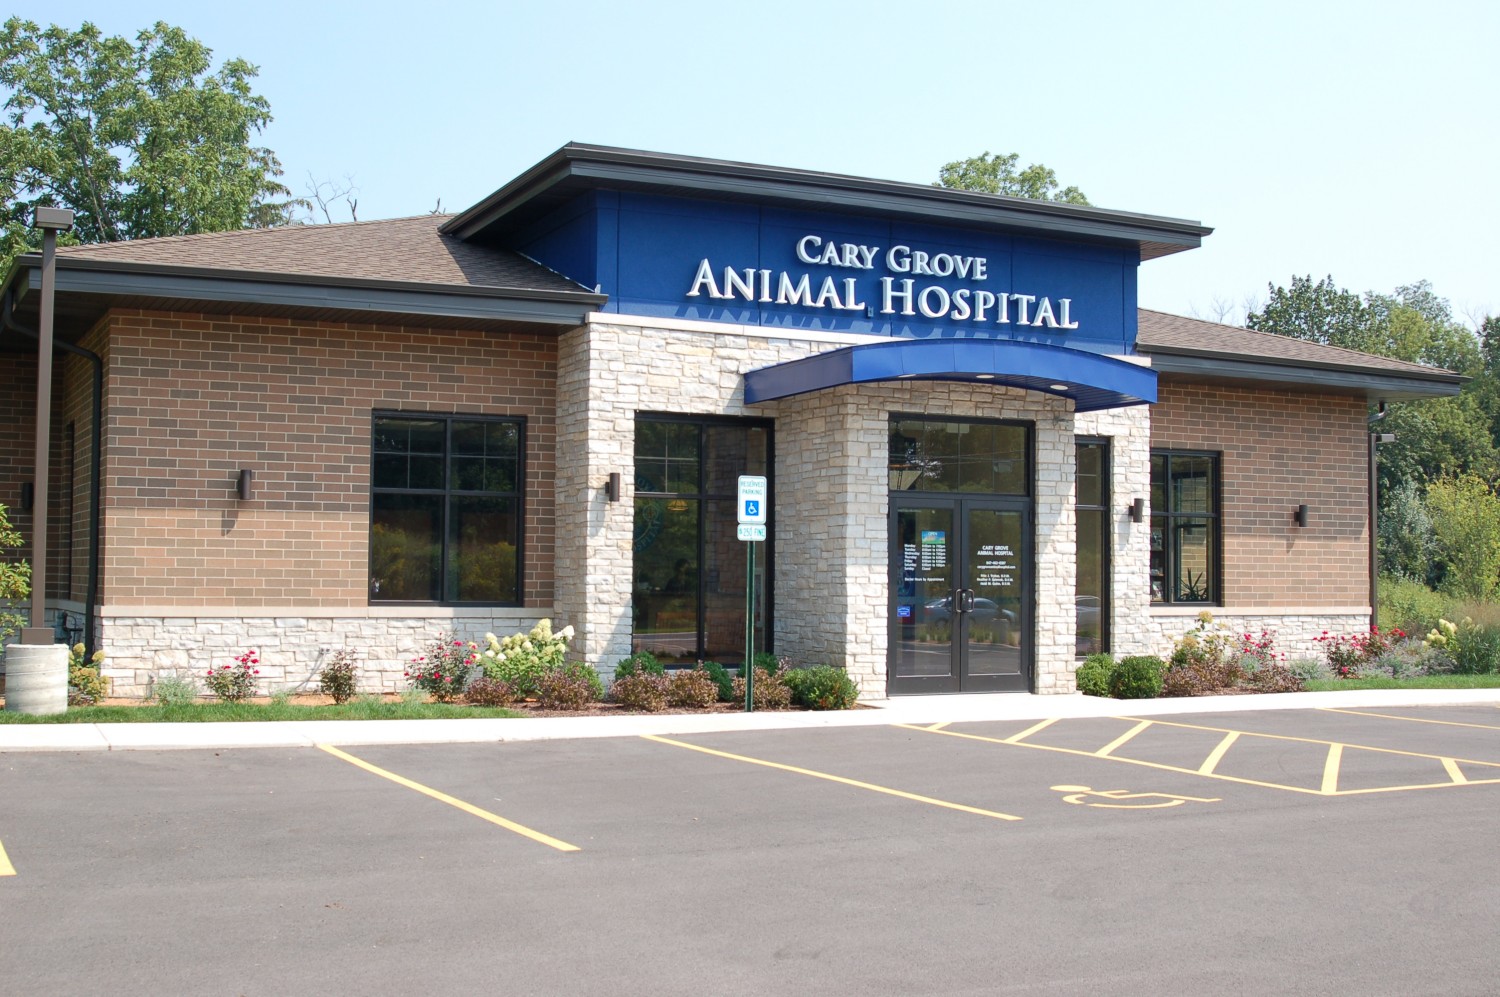 Cary Grove Animal Hospital Route 14 Cary, IL